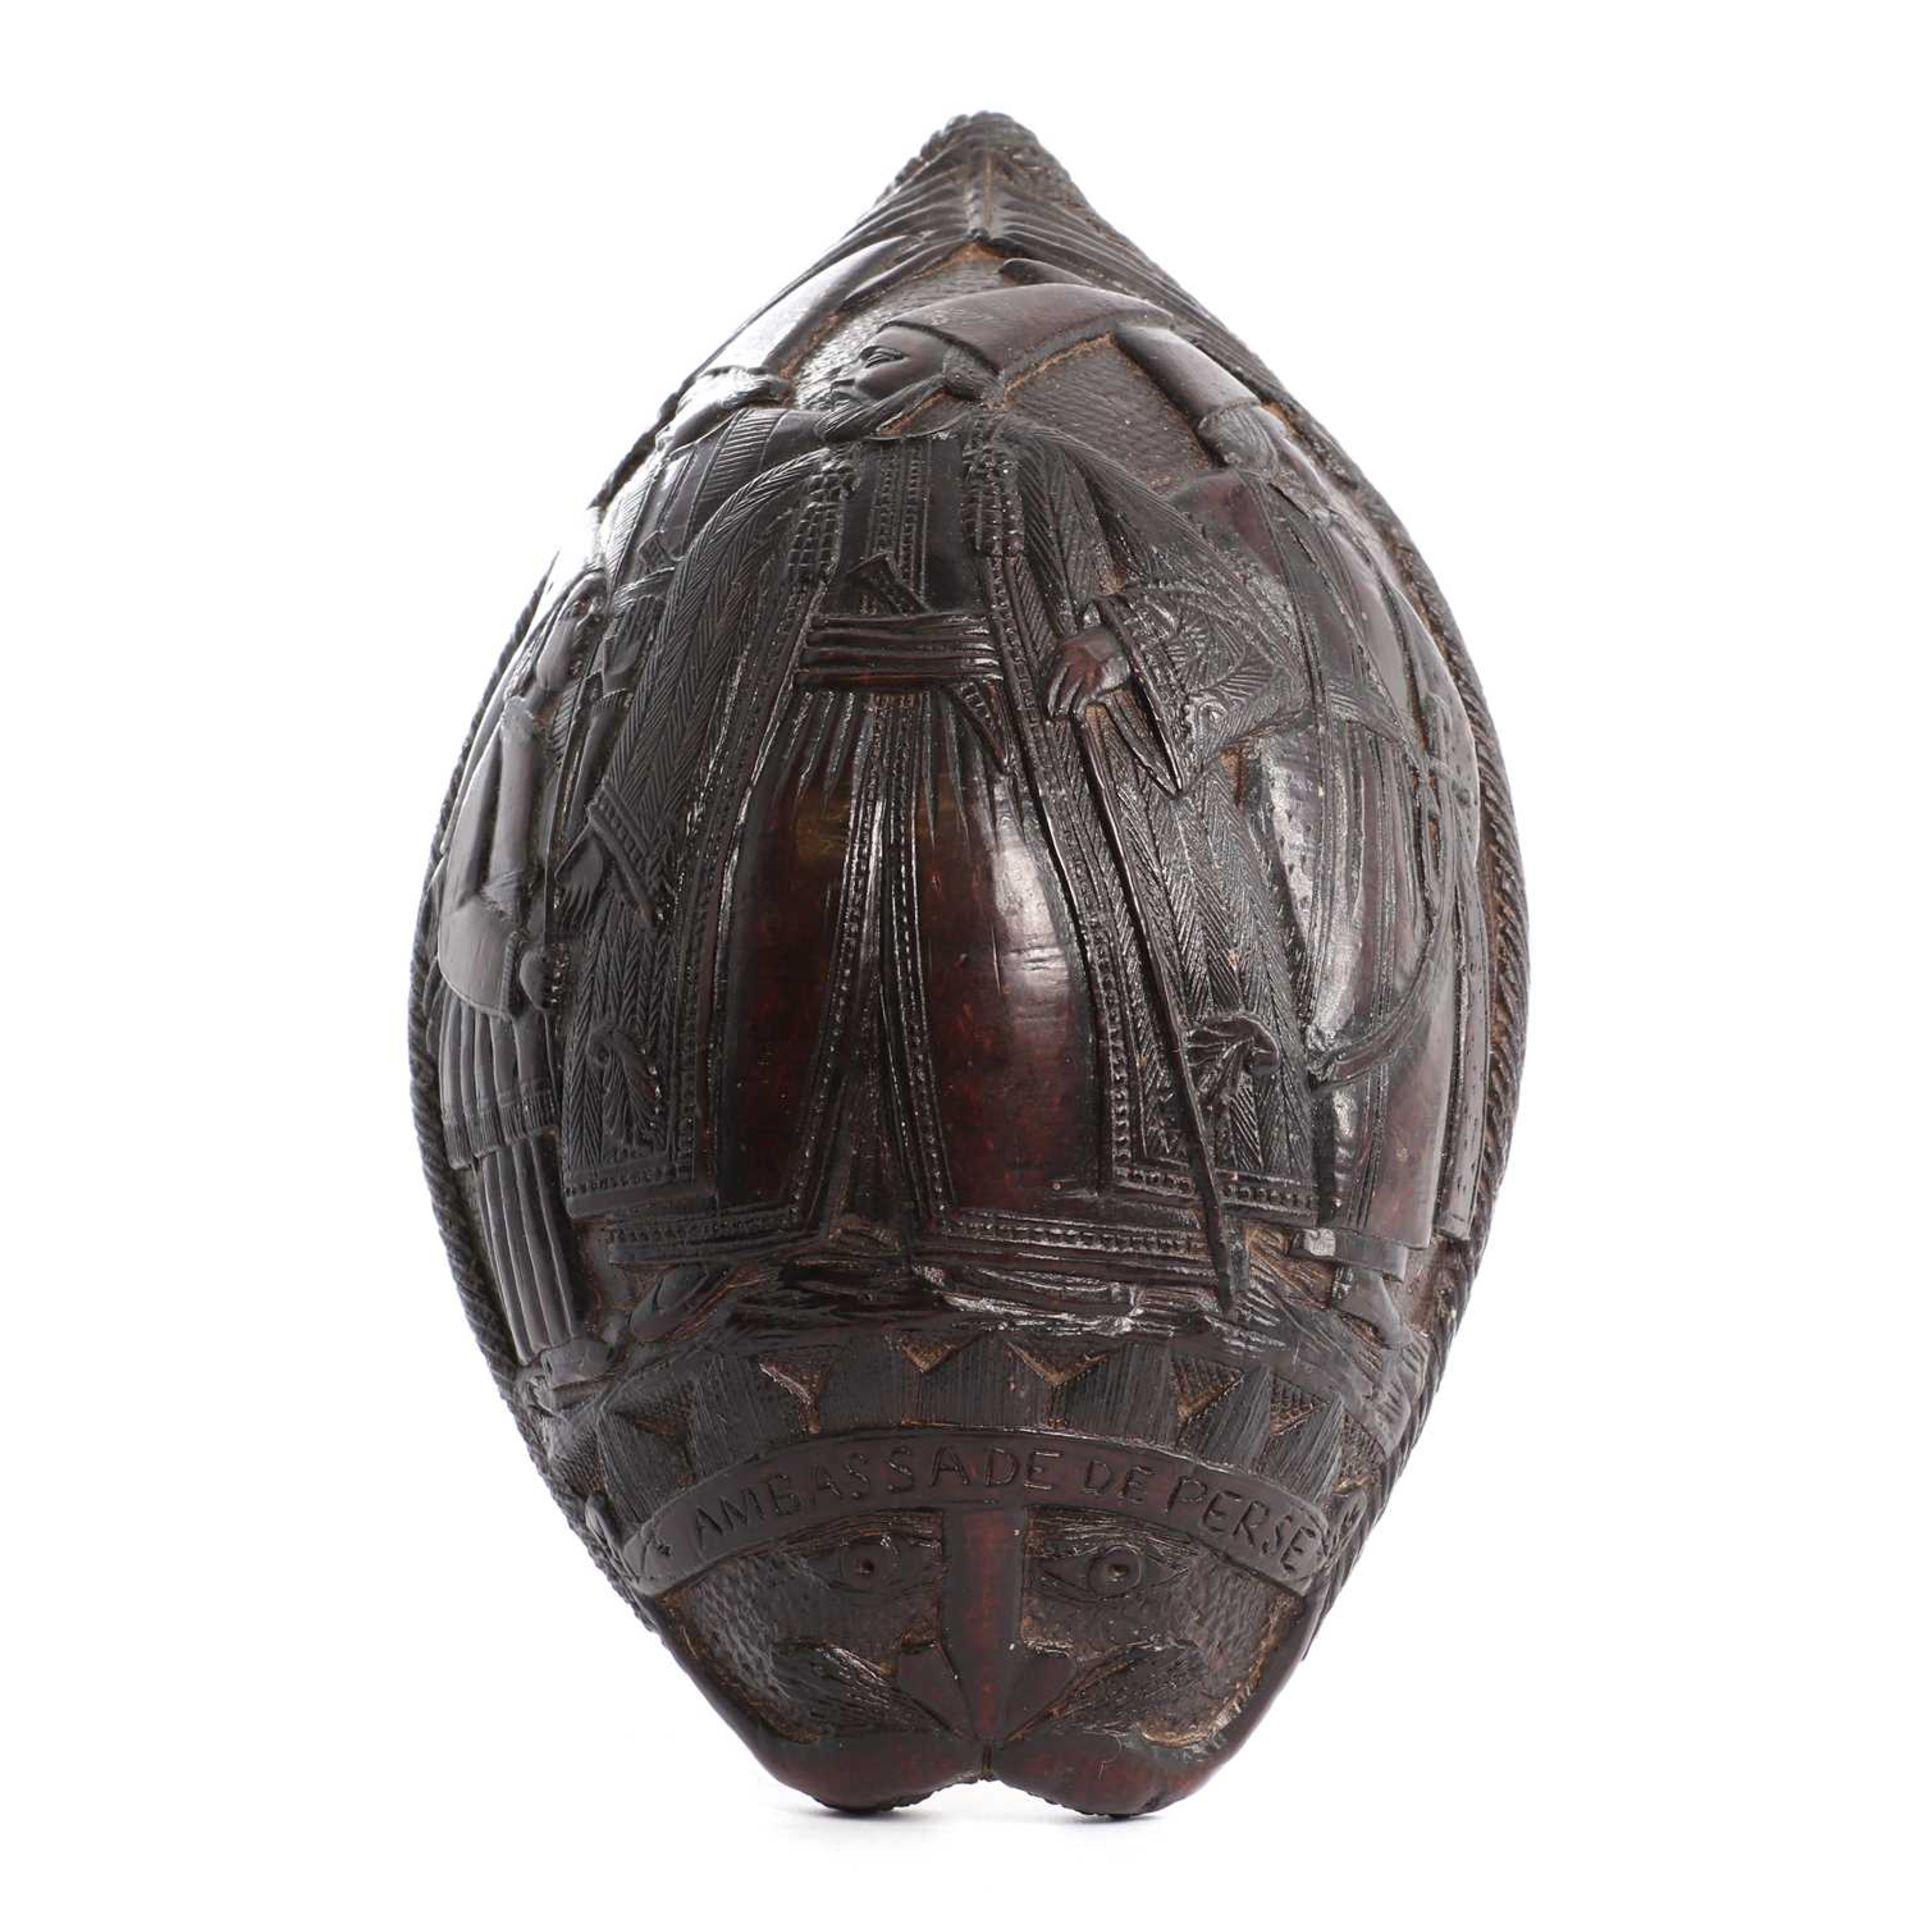 A carved coconut cup inscribed 'Ambassade De Perse', - Image 4 of 8